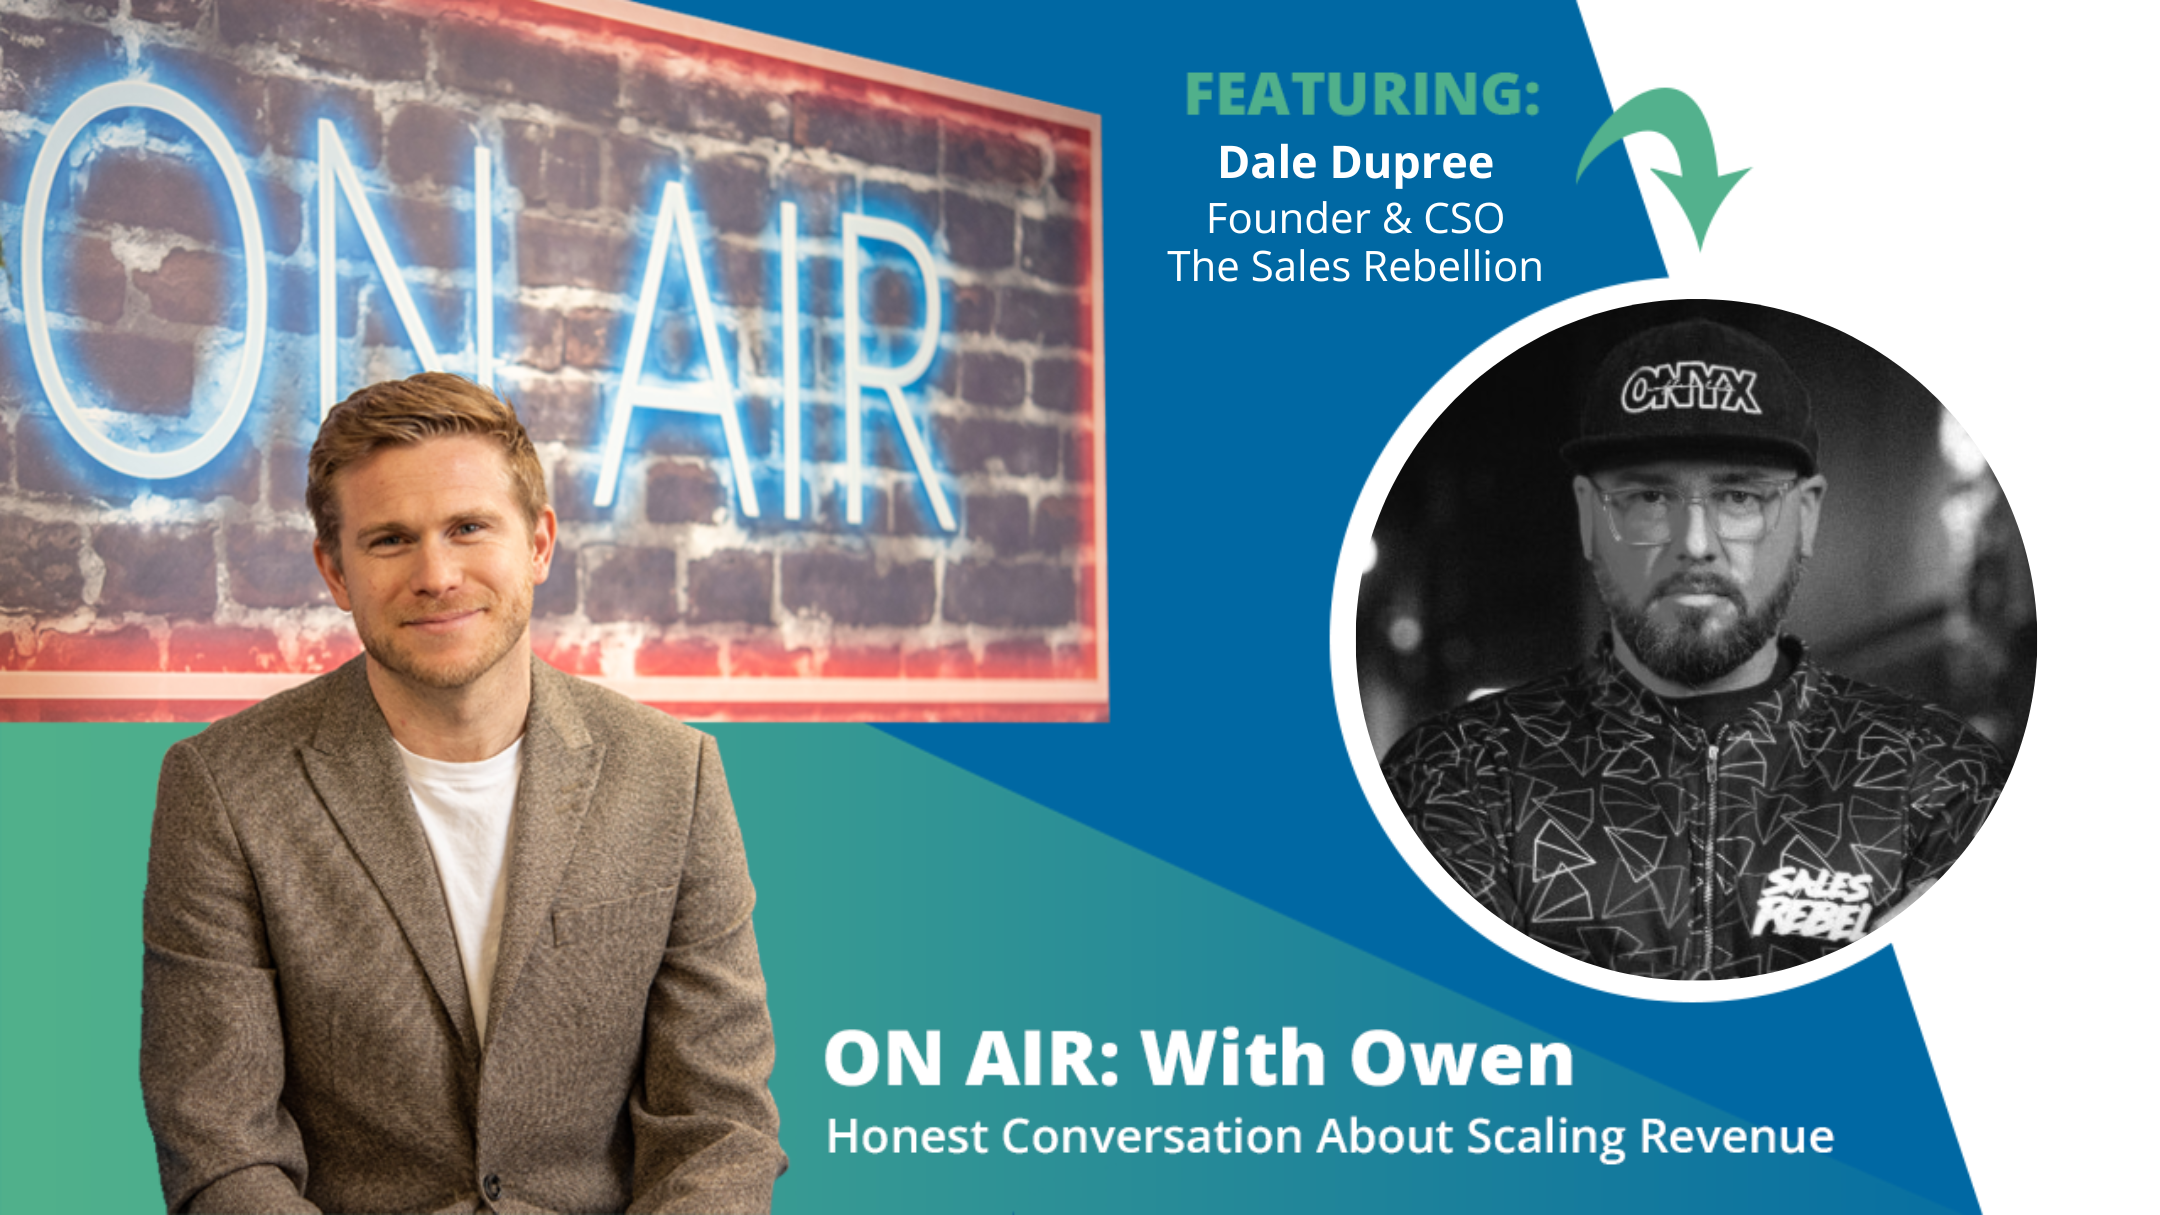 ON AIR: With Owen Episode 76 Featuring Dale Dupree – Founder & CSO, The Sales Rebellion